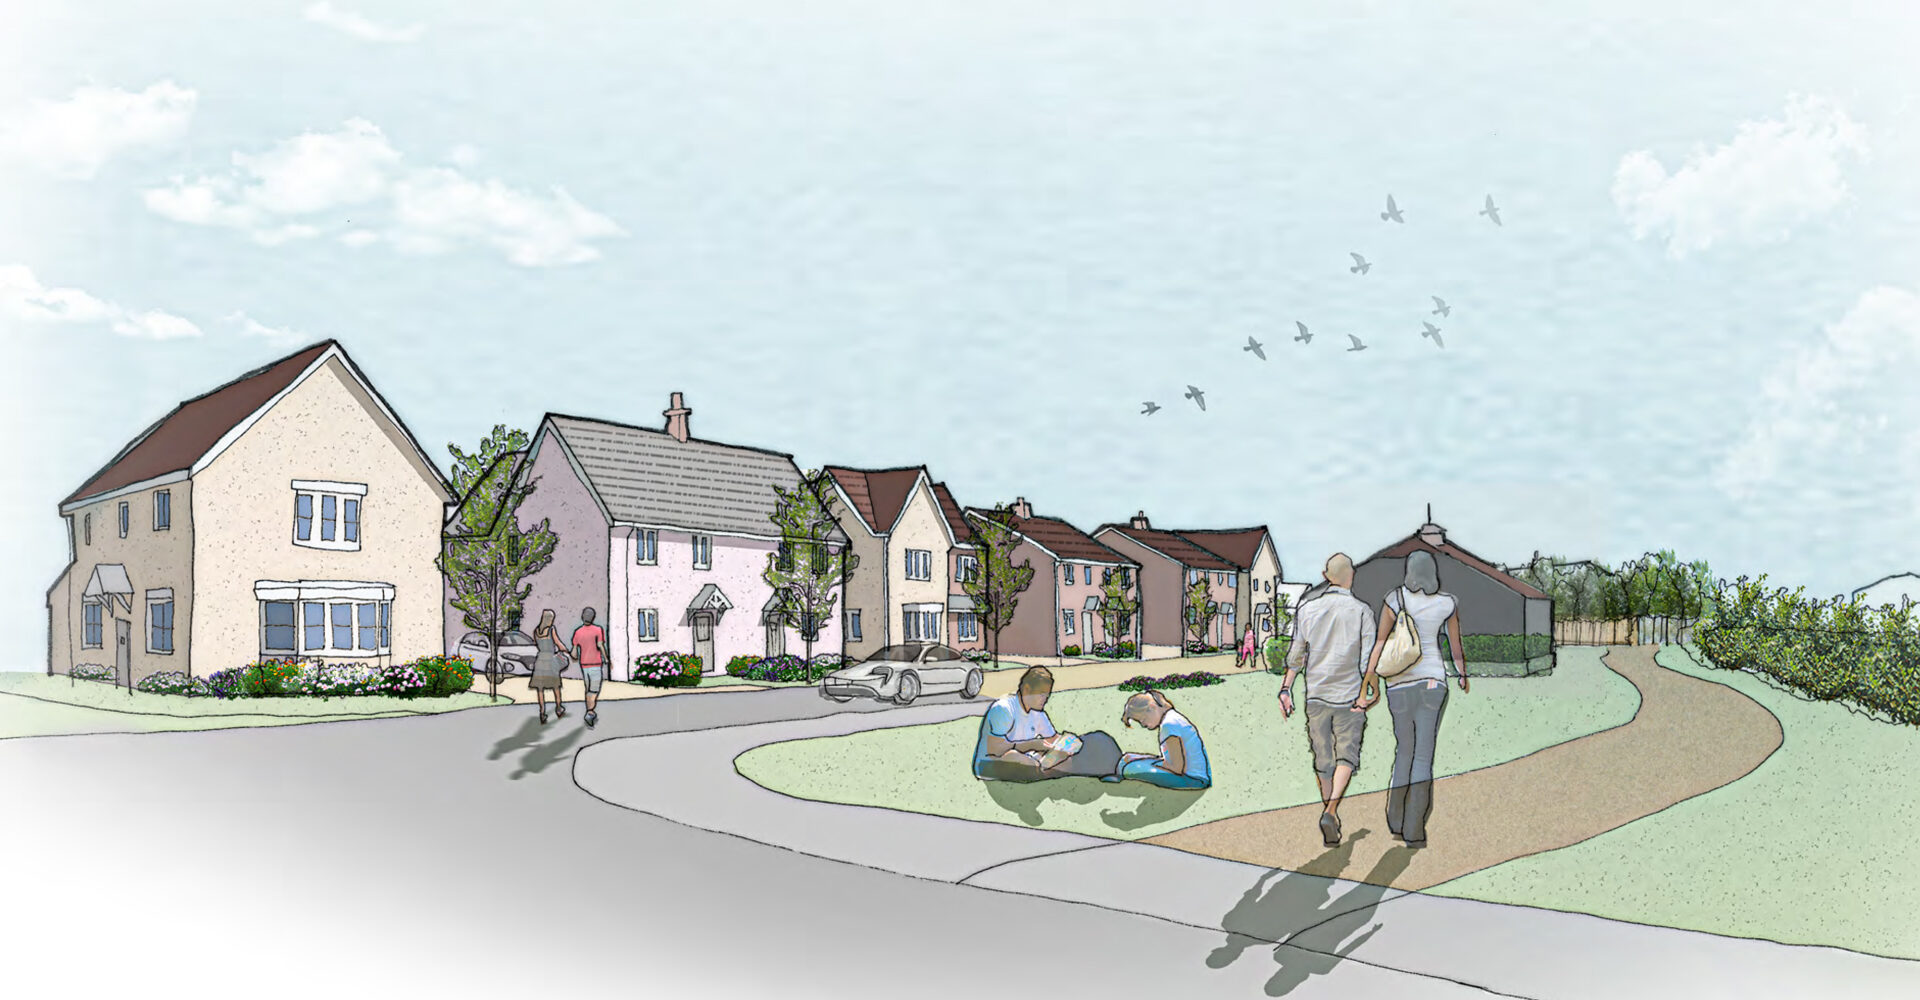 Arbora Homes Receives Planning Approval for Thoughtfully Designed Housing Development in Fordham, Essex